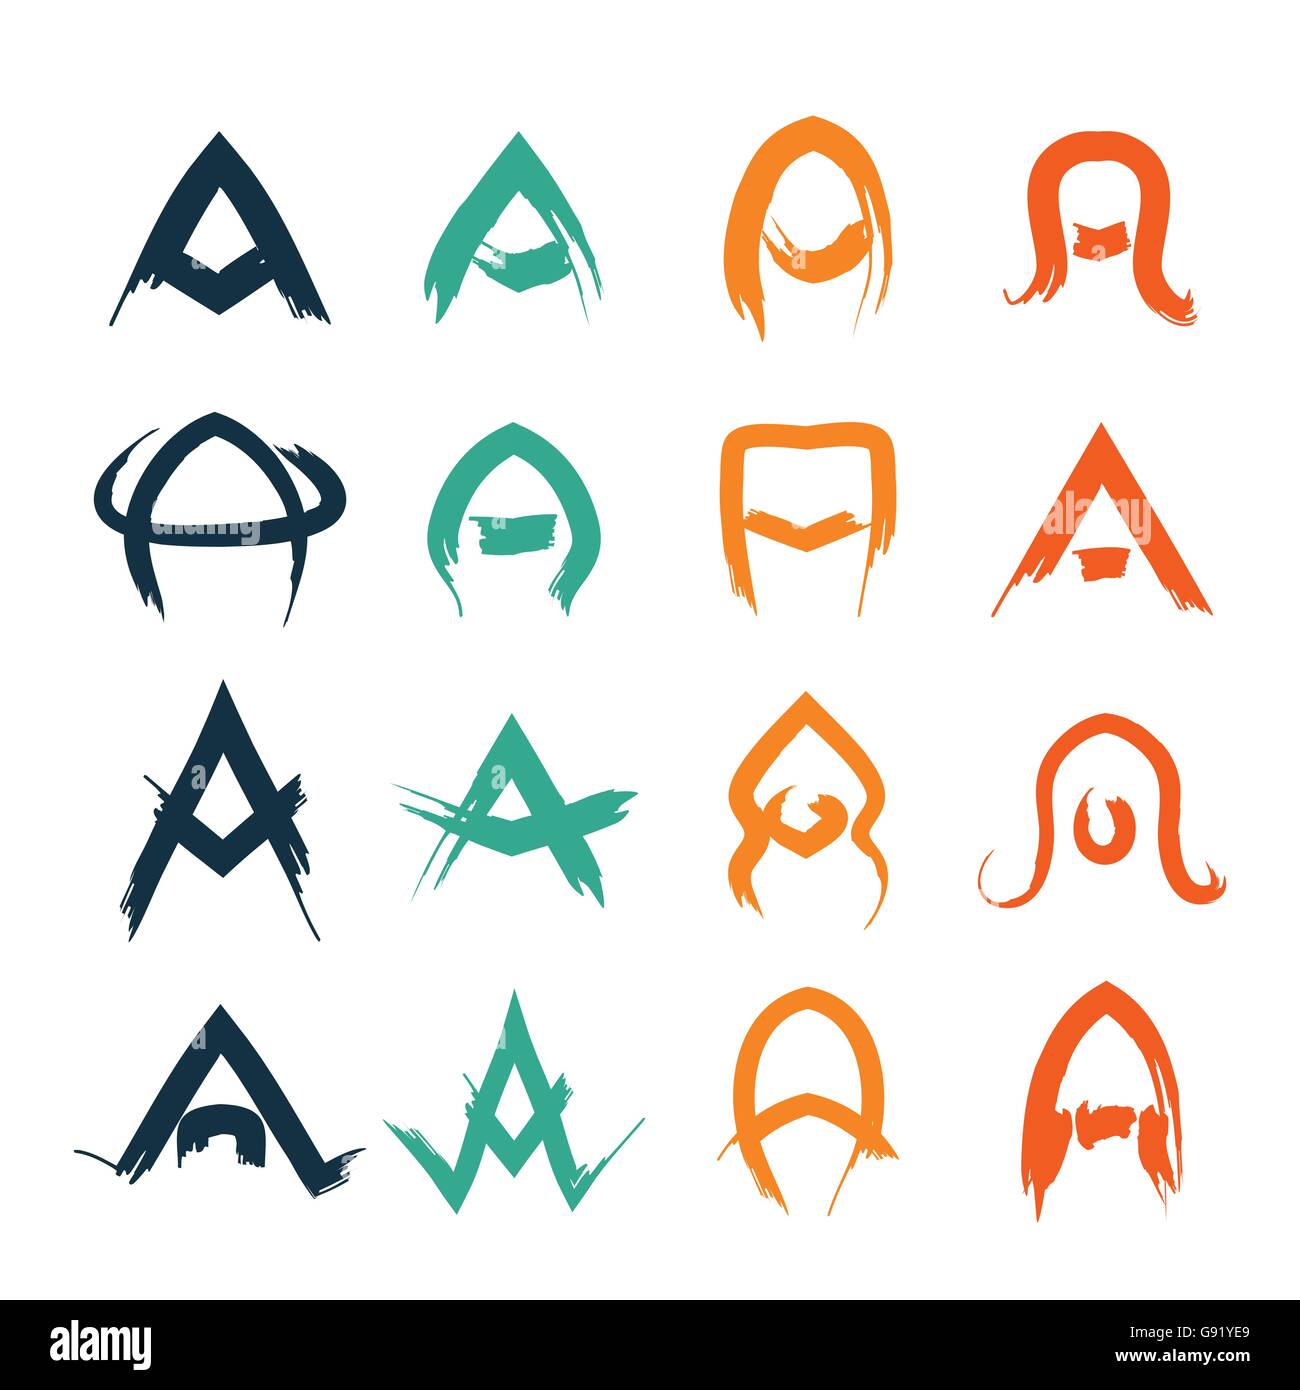 creative painted capital letter A design vector set Stock Vector